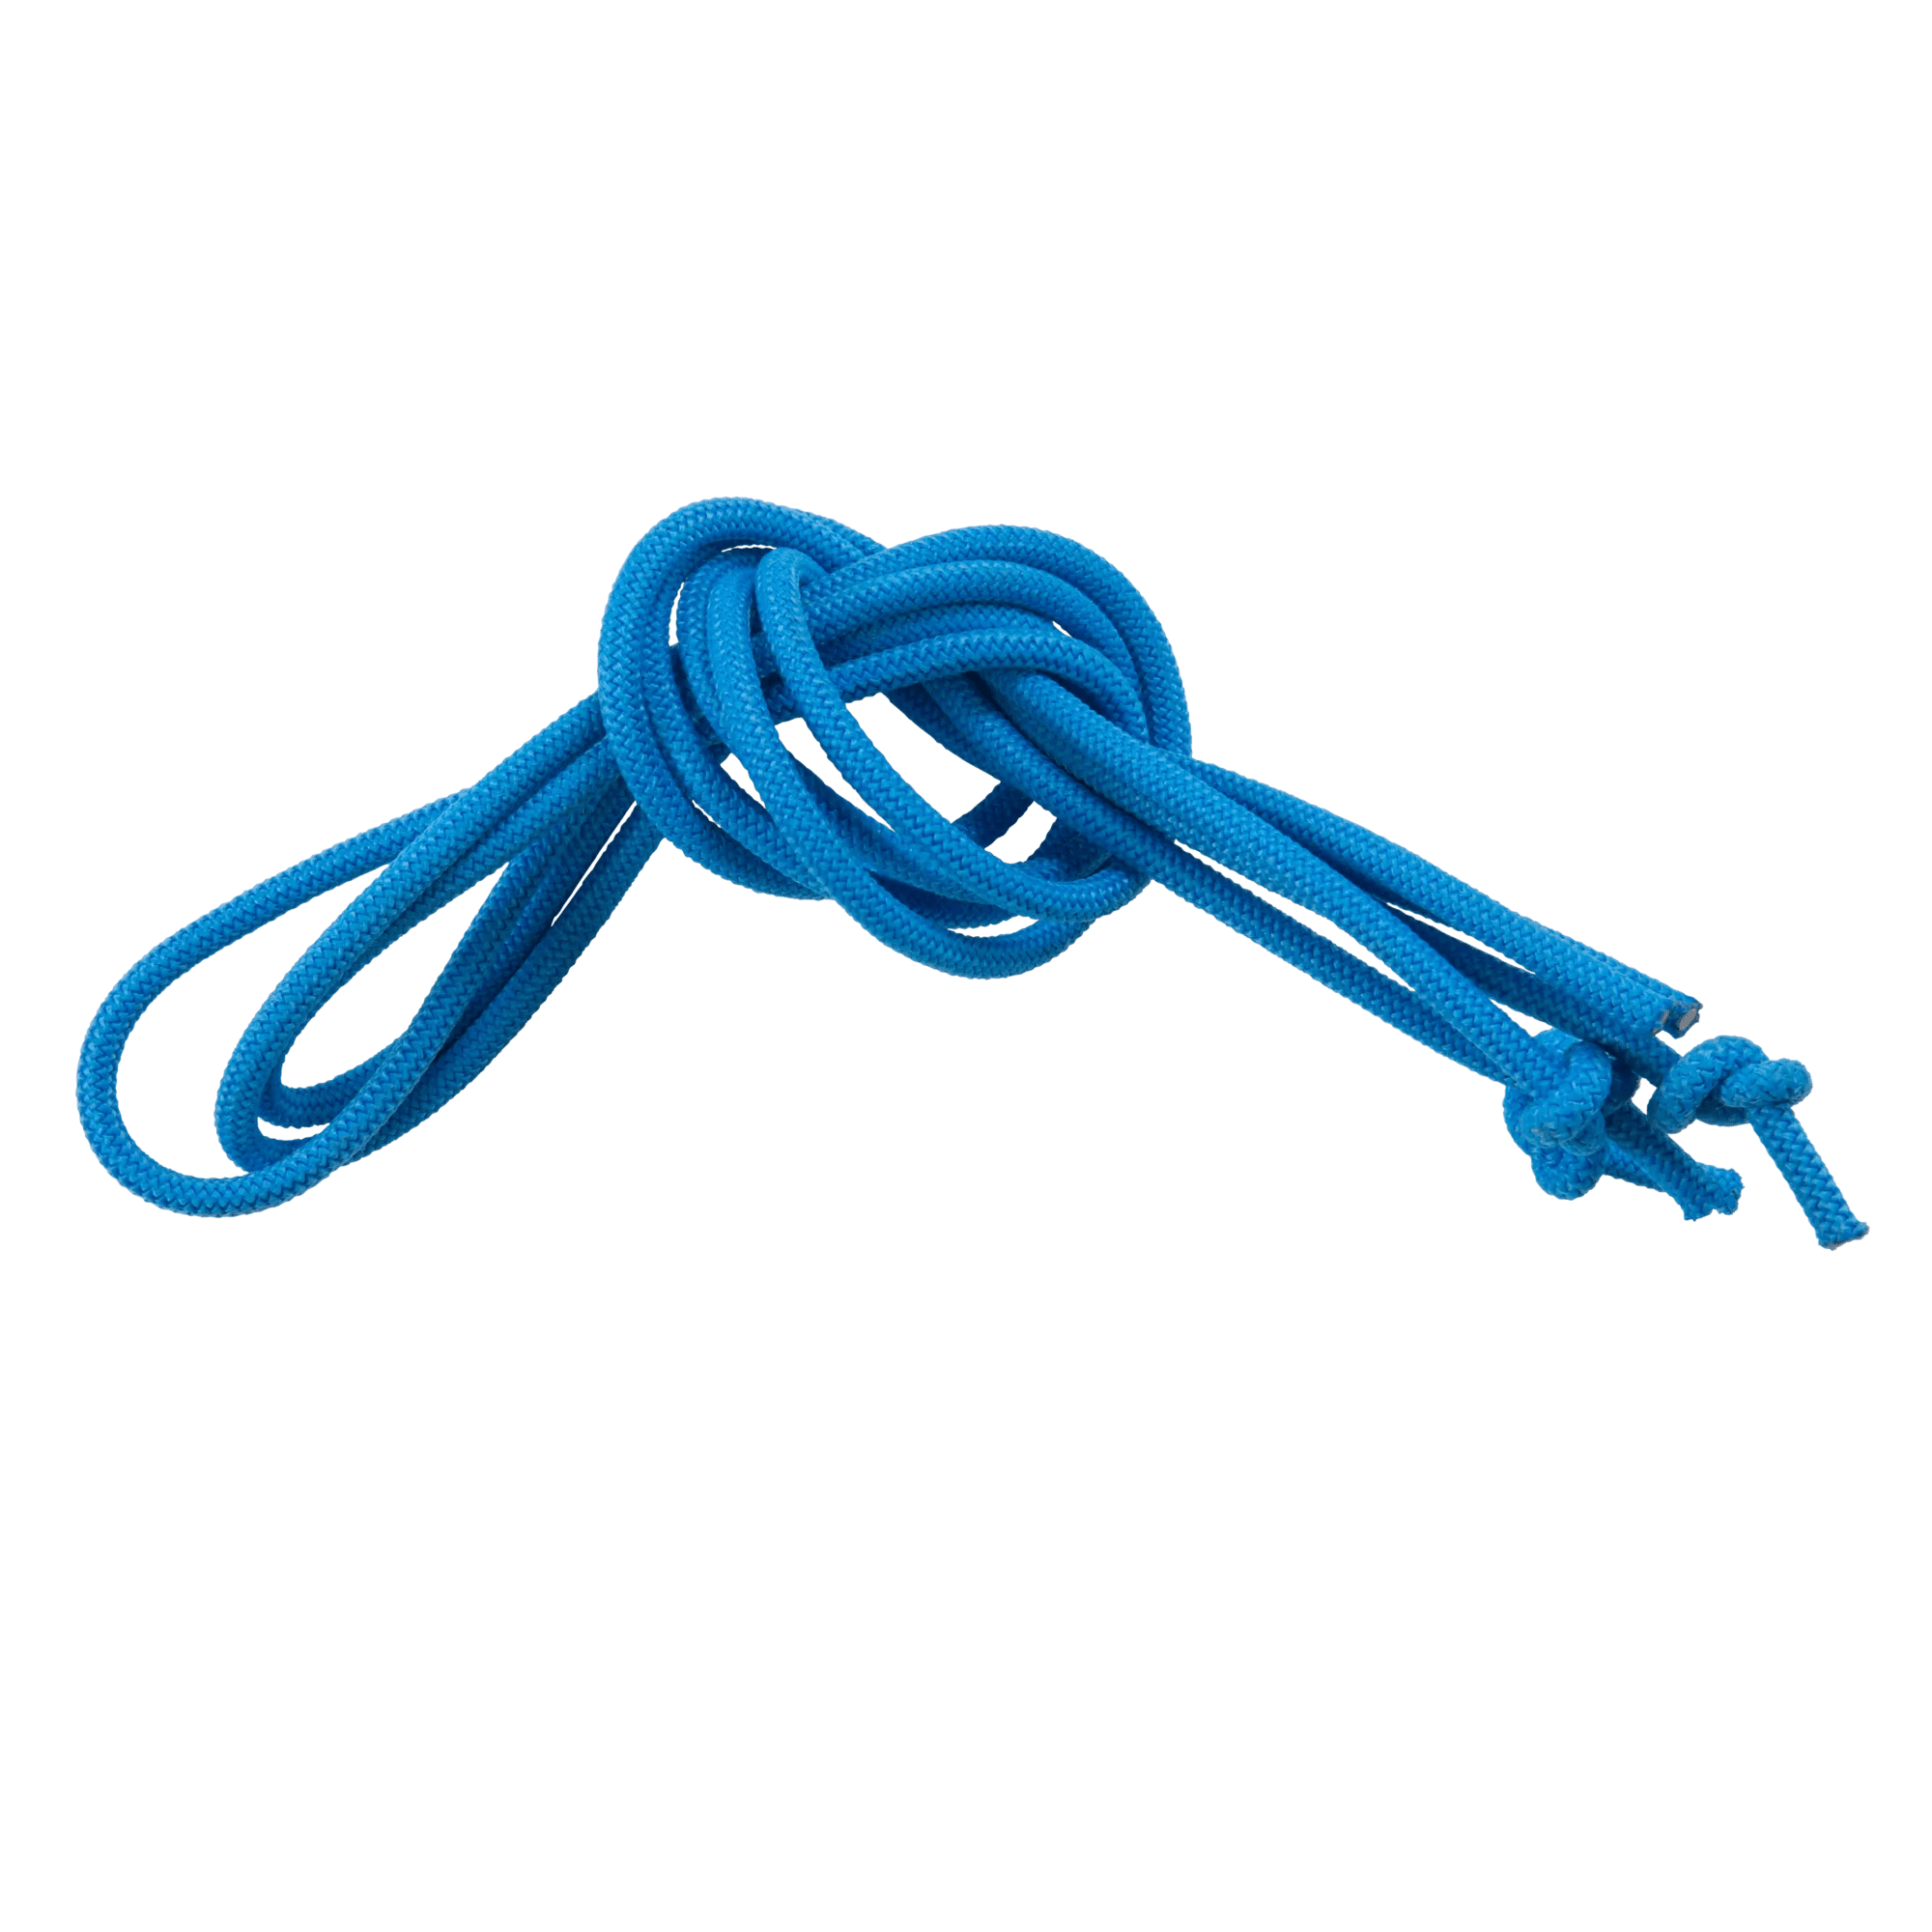 PELICAN - Electric Blue Bungee Cord Deck Rigging Kit -  - PS1612 - ISO